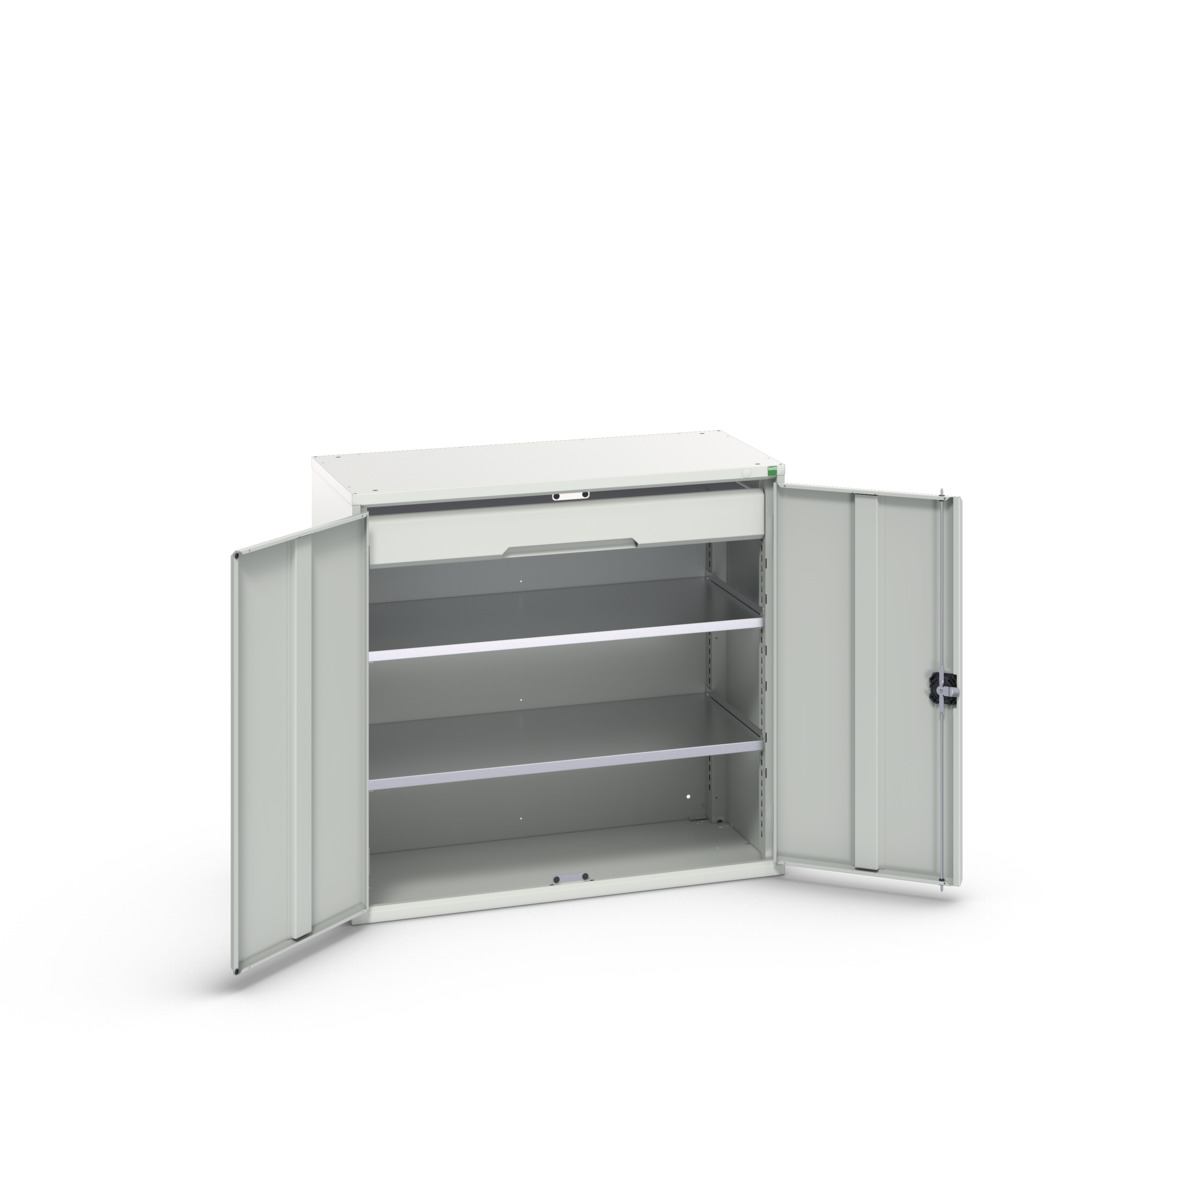 16926552.16 - verso kitted cupboard